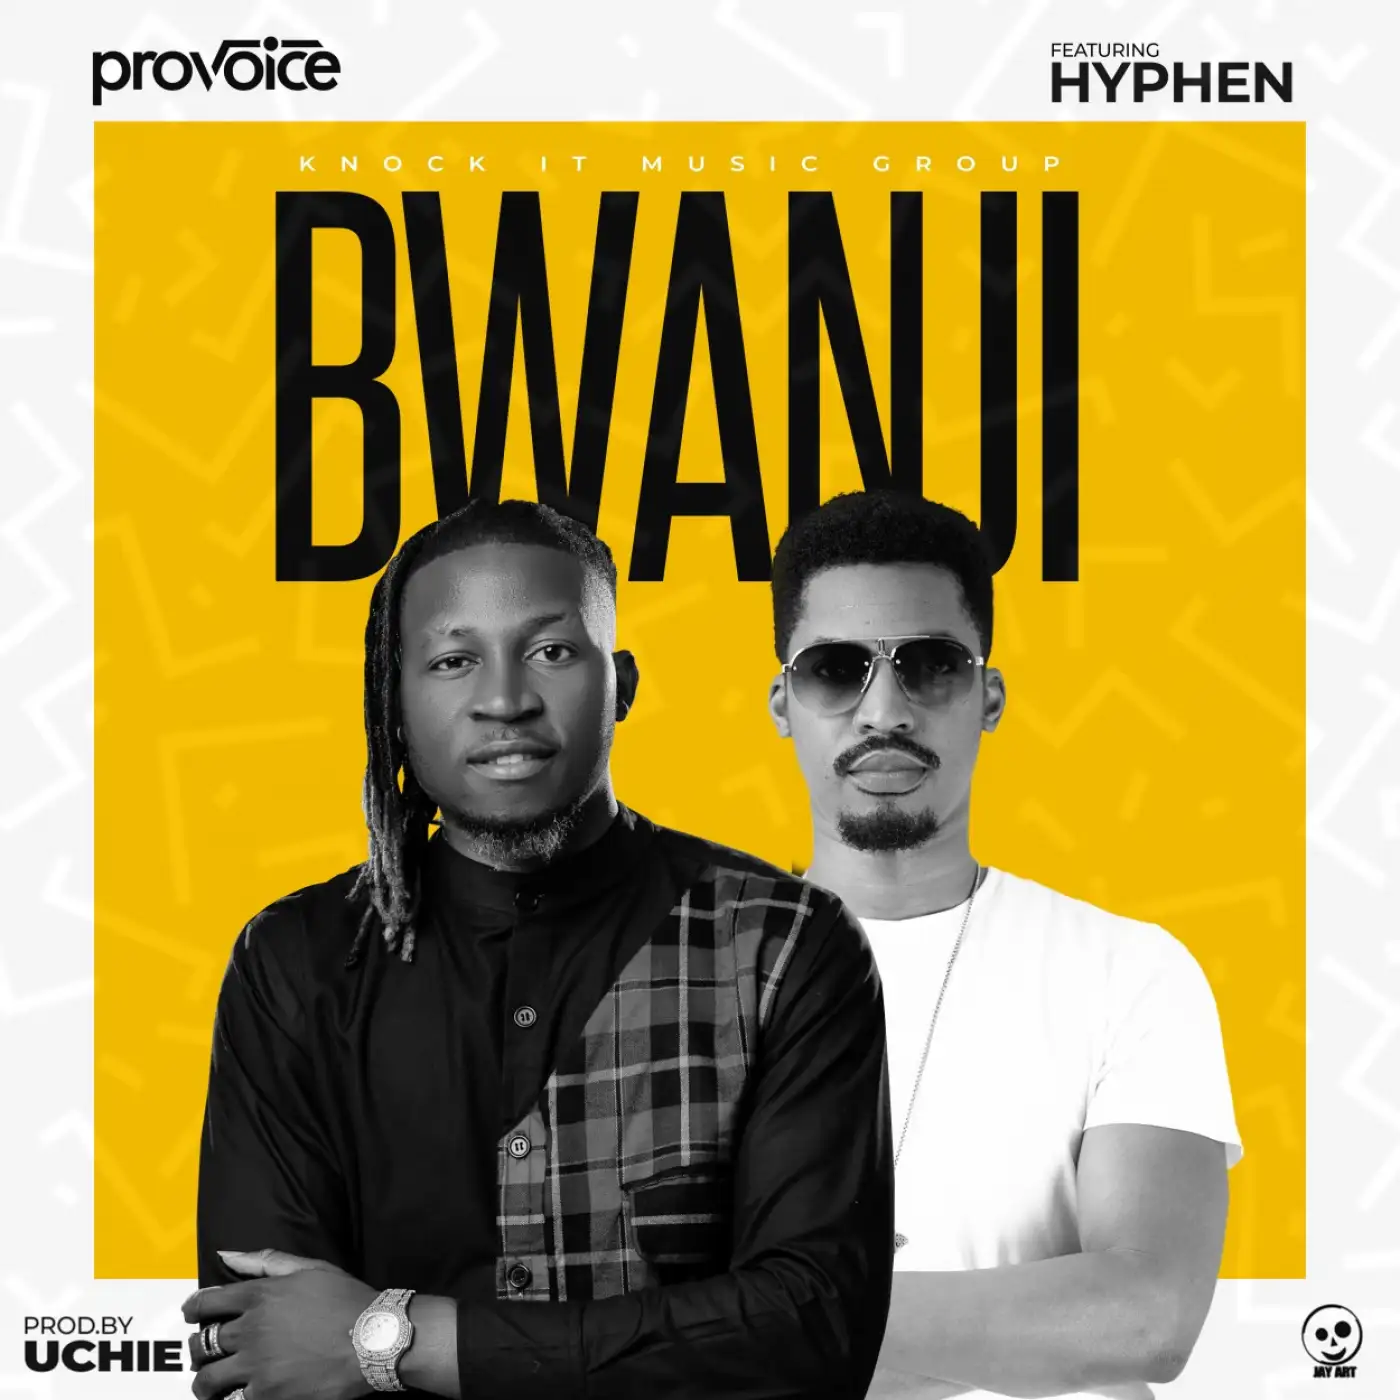 Provoice-Provoice - Bwanji ft Hyphen (Prod. Uchie)-song artwork cover